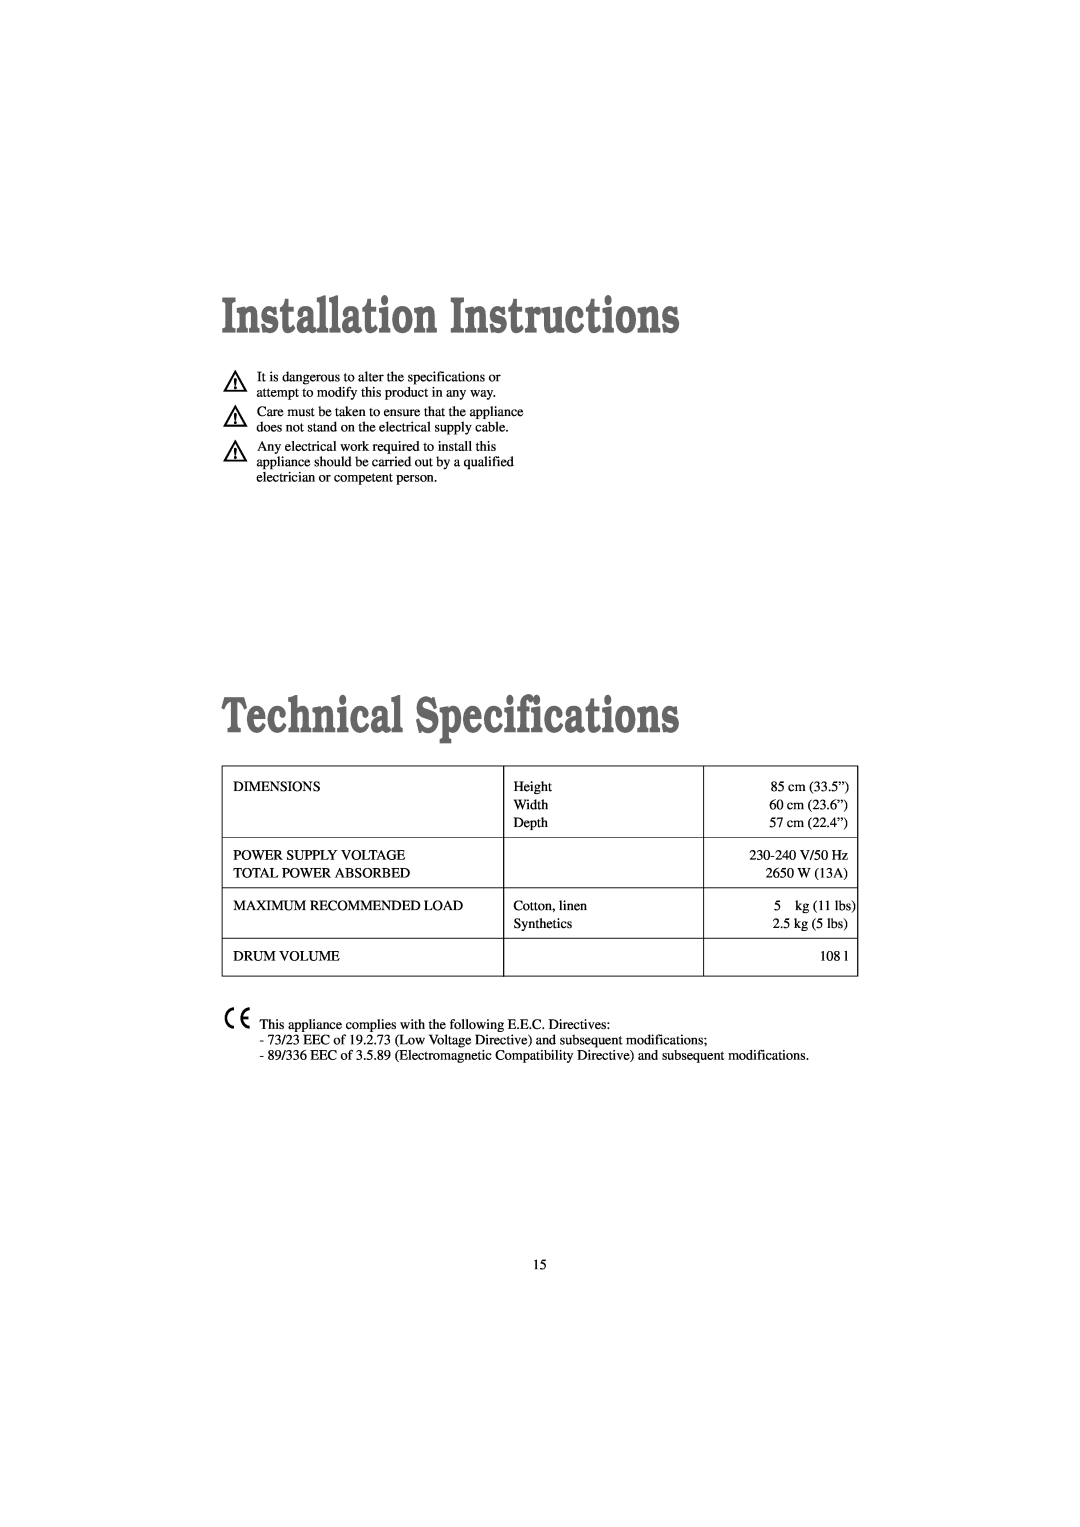 Zanussi TDS 281 W manual Installation Instructions, Technical Specifications 